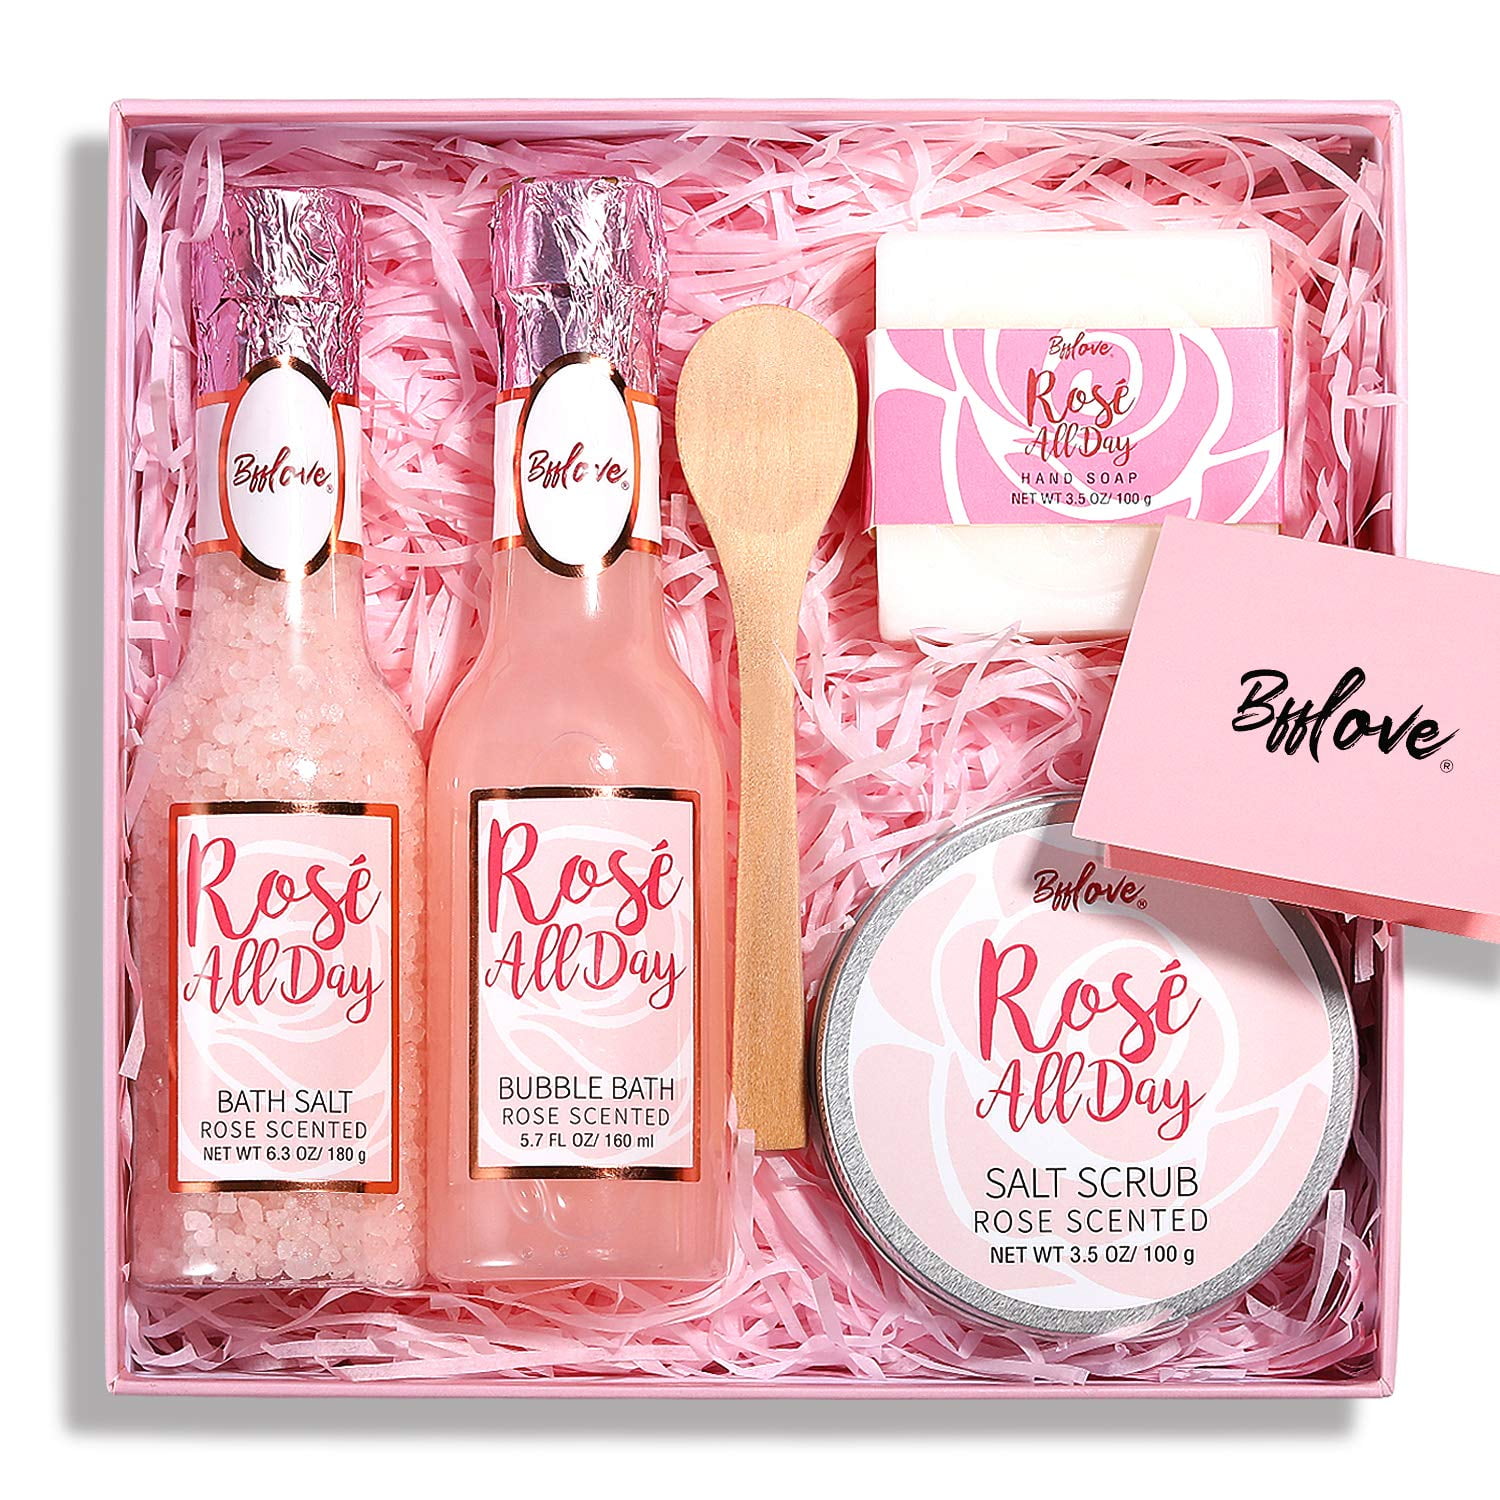 BFF Love 6pcs Spa Gifts for Women, Bath Gift Set, Rose Gift Baskets for Women, Spa Kit with Essential Rose Oil, Bath Salt, Soap, Natural Petals